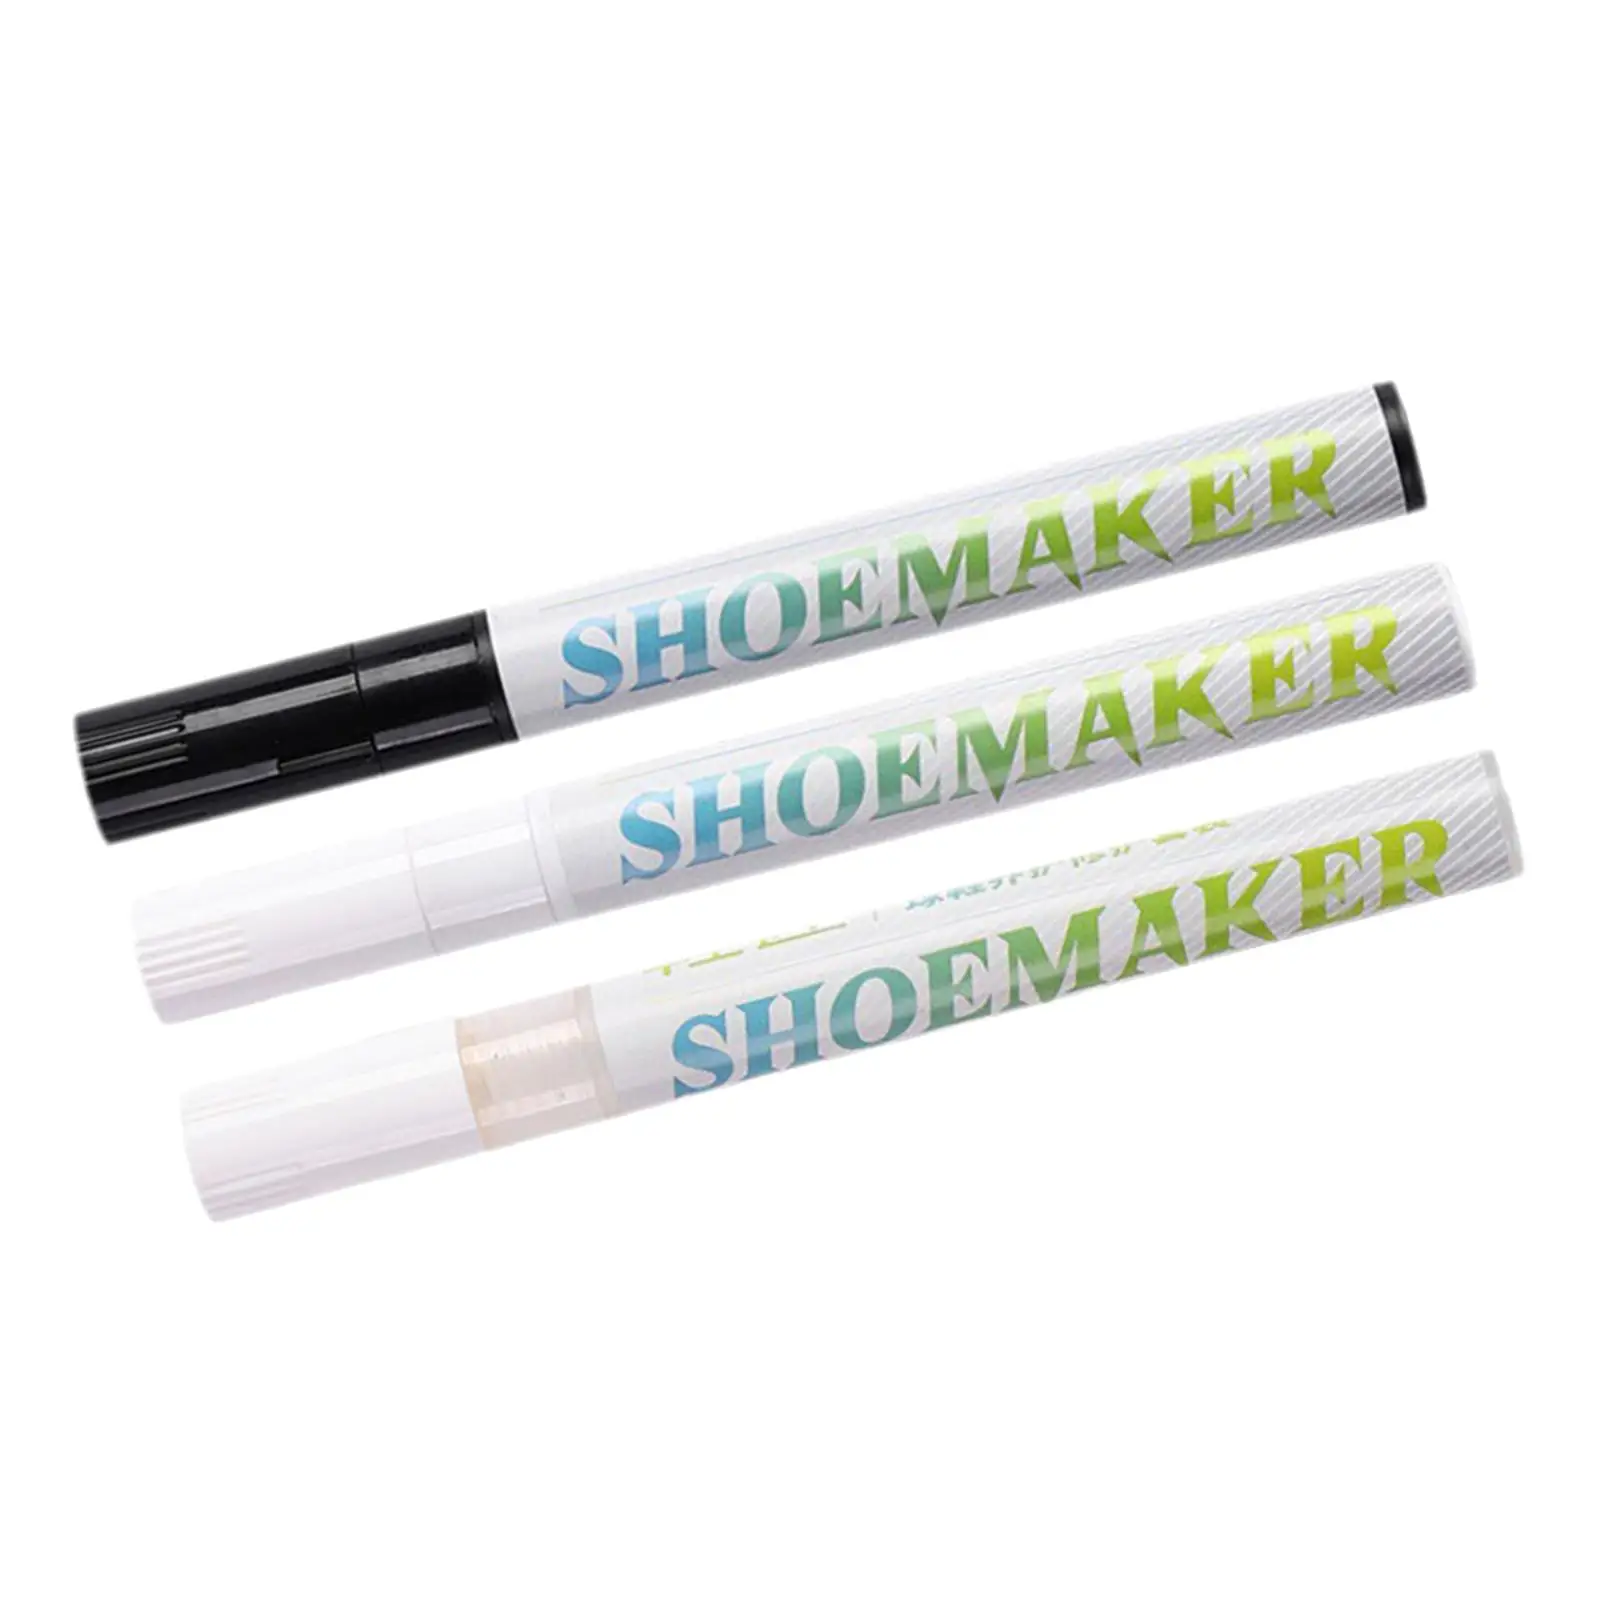 3x Shoes Cleaner Pens Cleaner Compact Lightweight Anti Oxidation Pens for Leisure Shoes Fabric Suede Leather Shoes Canvas Shoes